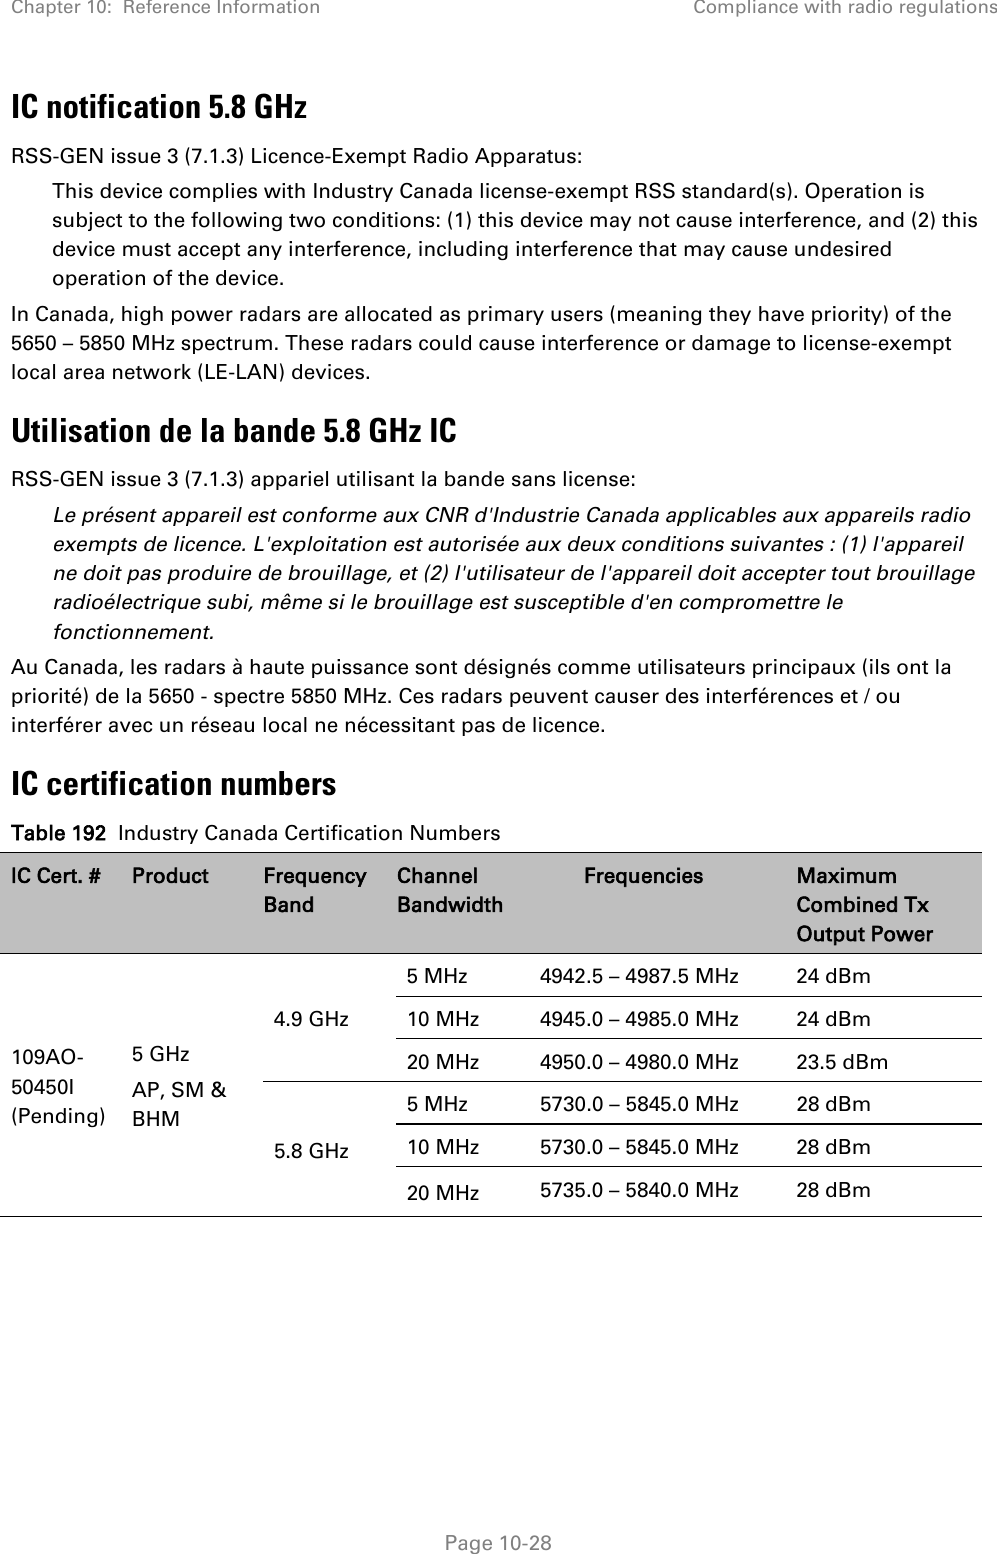 Chapter 10:  Reference Information Compliance with radio regulations   Page 10-28 IC notification 5.8 GHz RSS-GEN issue 3 (7.1.3) Licence-Exempt Radio Apparatus: This device complies with Industry Canada license-exempt RSS standard(s). Operation is subject to the following two conditions: (1) this device may not cause interference, and (2) this device must accept any interference, including interference that may cause undesired operation of the device. In Canada, high power radars are allocated as primary users (meaning they have priority) of the 5650 – 5850 MHz spectrum. These radars could cause interference or damage to license-exempt local area network (LE-LAN) devices. Utilisation de la bande 5.8 GHz IC RSS-GEN issue 3 (7.1.3) appariel utilisant la bande sans license: Le présent appareil est conforme aux CNR d&apos;Industrie Canada applicables aux appareils radio exempts de licence. L&apos;exploitation est autorisée aux deux conditions suivantes : (1) l&apos;appareil ne doit pas produire de brouillage, et (2) l&apos;utilisateur de l&apos;appareil doit accepter tout brouillage radioélectrique subi, même si le brouillage est susceptible d&apos;en compromettre le fonctionnement. Au Canada, les radars à haute puissance sont désignés comme utilisateurs principaux (ils ont la priorité) de la 5650 - spectre 5850 MHz. Ces radars peuvent causer des interférences et / ou interférer avec un réseau local ne nécessitant pas de licence. IC certification numbers Table 192  Industry Canada Certification Numbers IC Cert. # Product Frequency Band Channel Bandwidth Frequencies Maximum Combined Tx Output Power 109AO-50450I (Pending) 5 GHz AP, SM &amp; BHM 4.9 GHz 5 MHz 4942.5 – 4987.5 MHz 24 dBm 10 MHz 4945.0 – 4985.0 MHz 24 dBm 20 MHz 4950.0 – 4980.0 MHz 23.5 dBm 5.8 GHz 5 MHz 5730.0 – 5845.0 MHz 28 dBm 10 MHz  5730.0 – 5845.0 MHz 28 dBm 20 MHz 5735.0 – 5840.0 MHz 28 dBm  